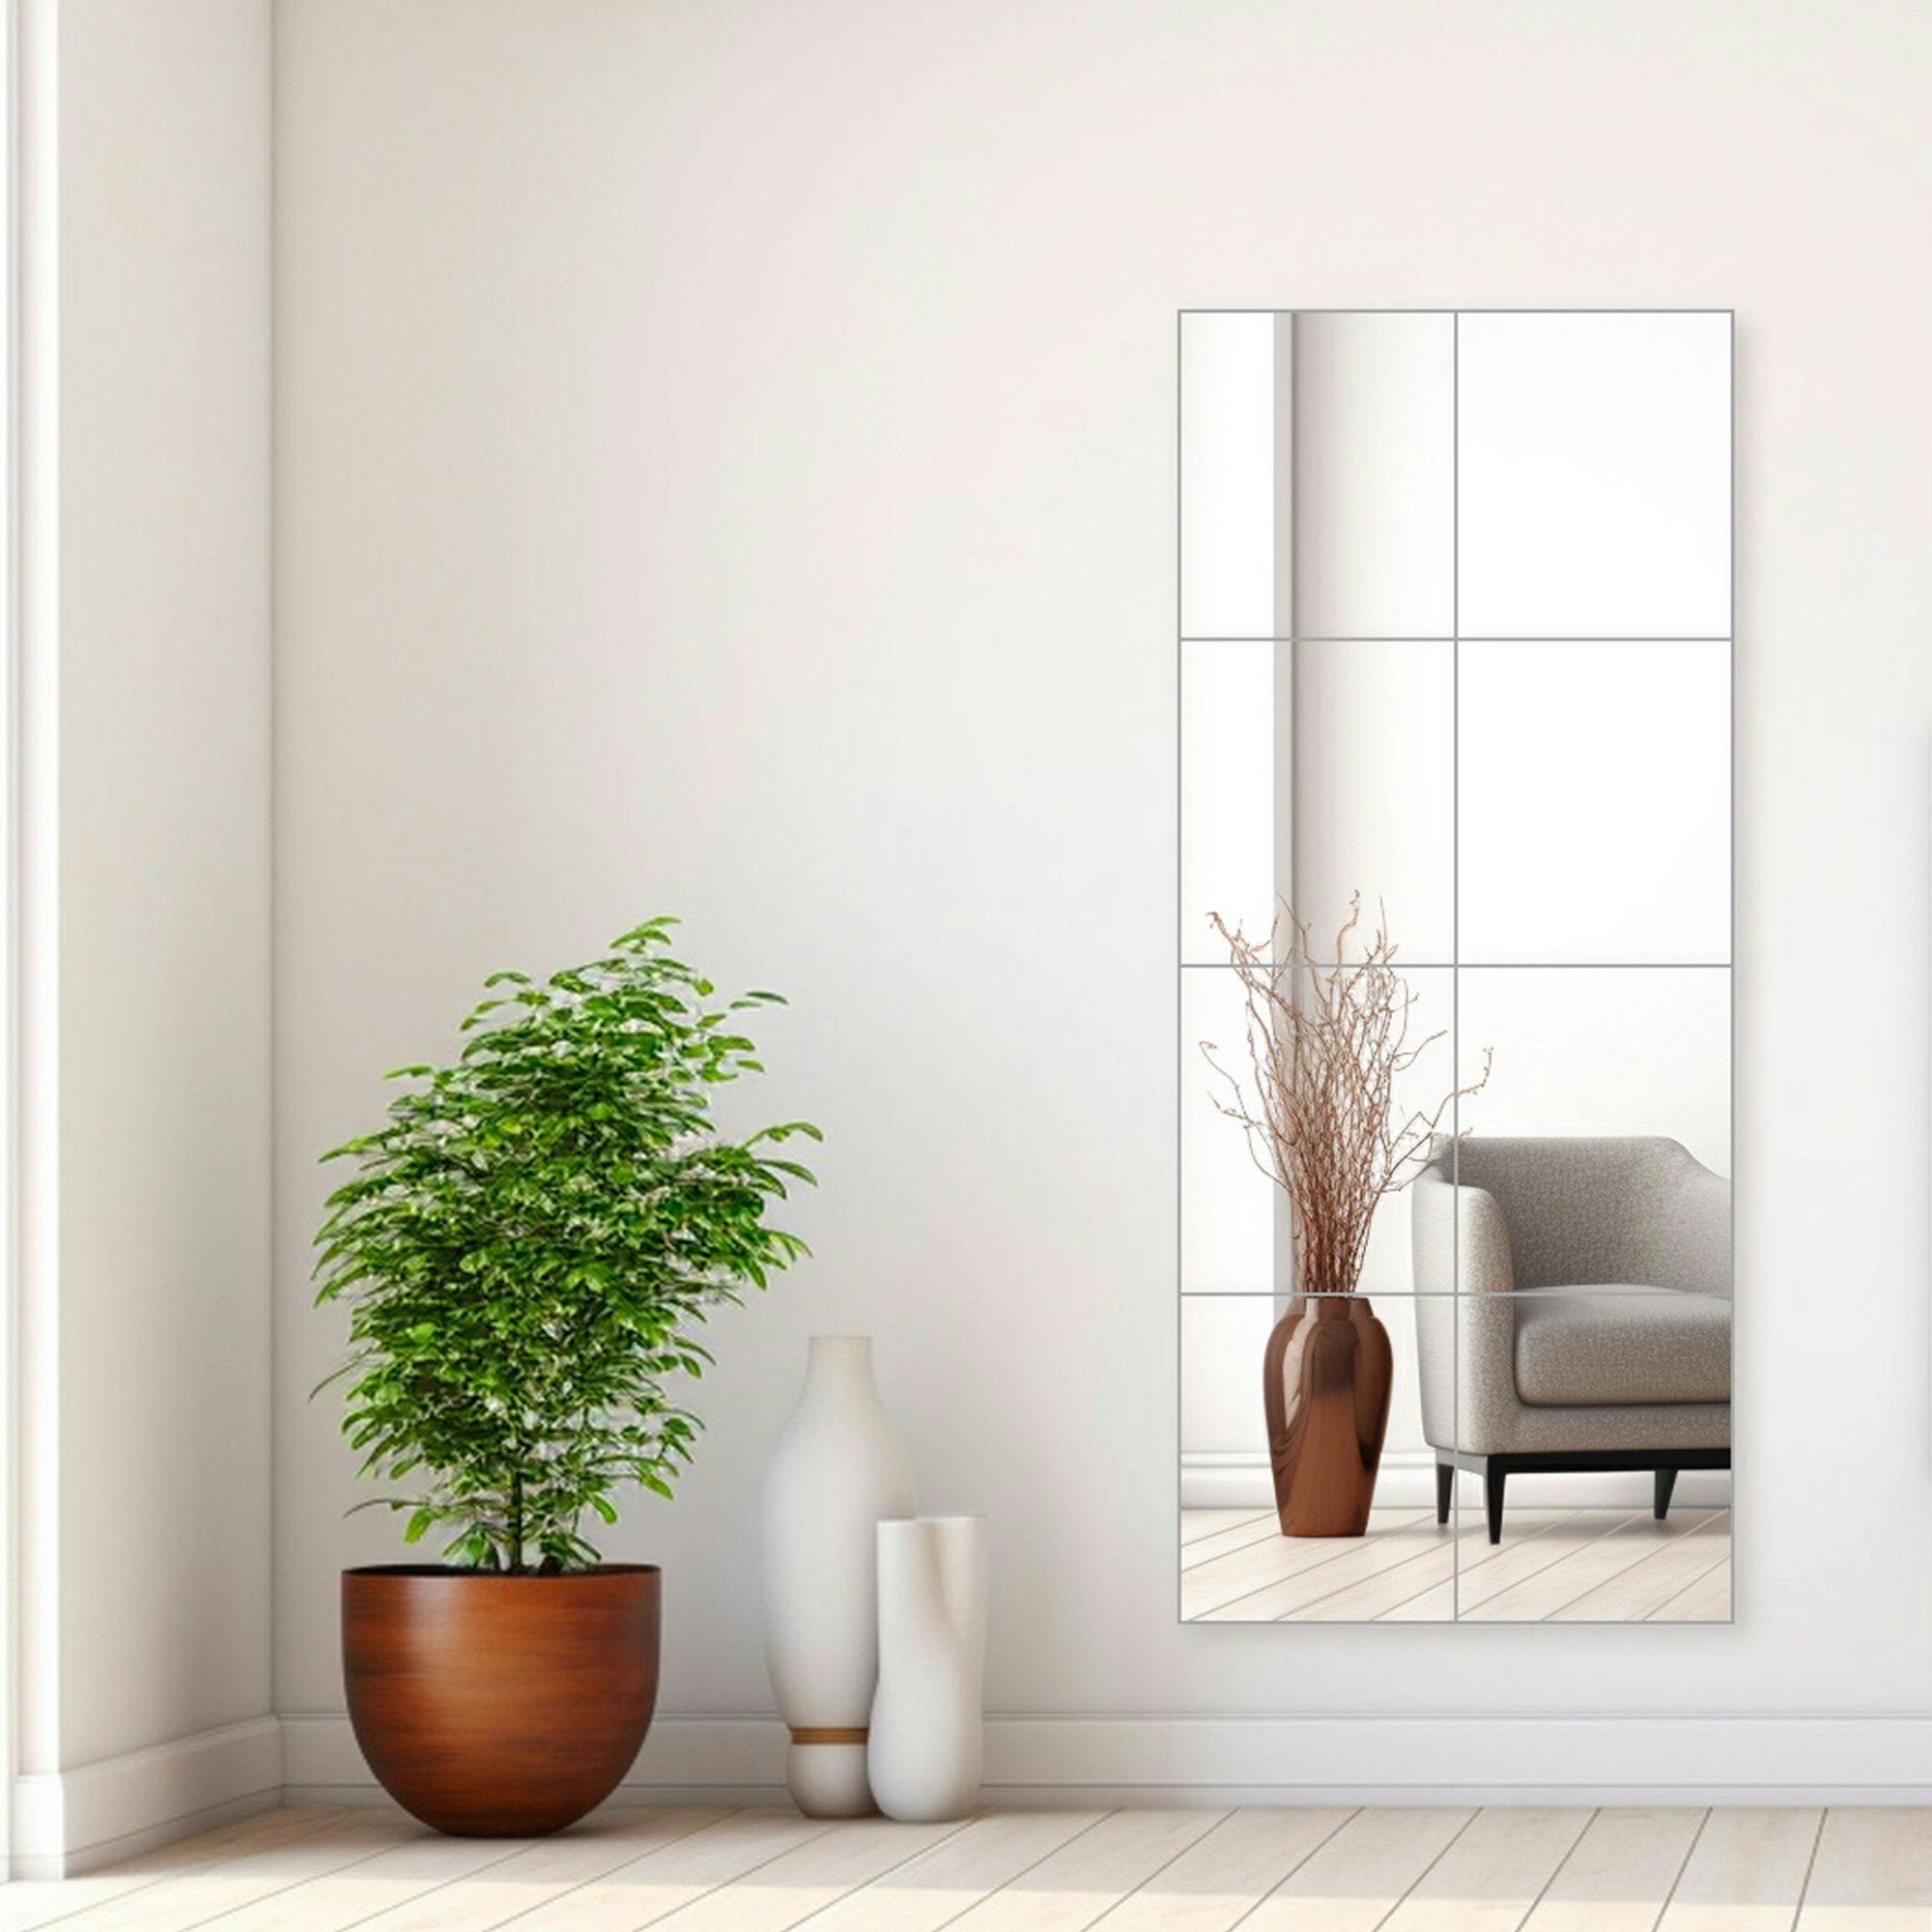 8 piece wall mirror tiles in a living room environment next to white vases and a green pottery plant